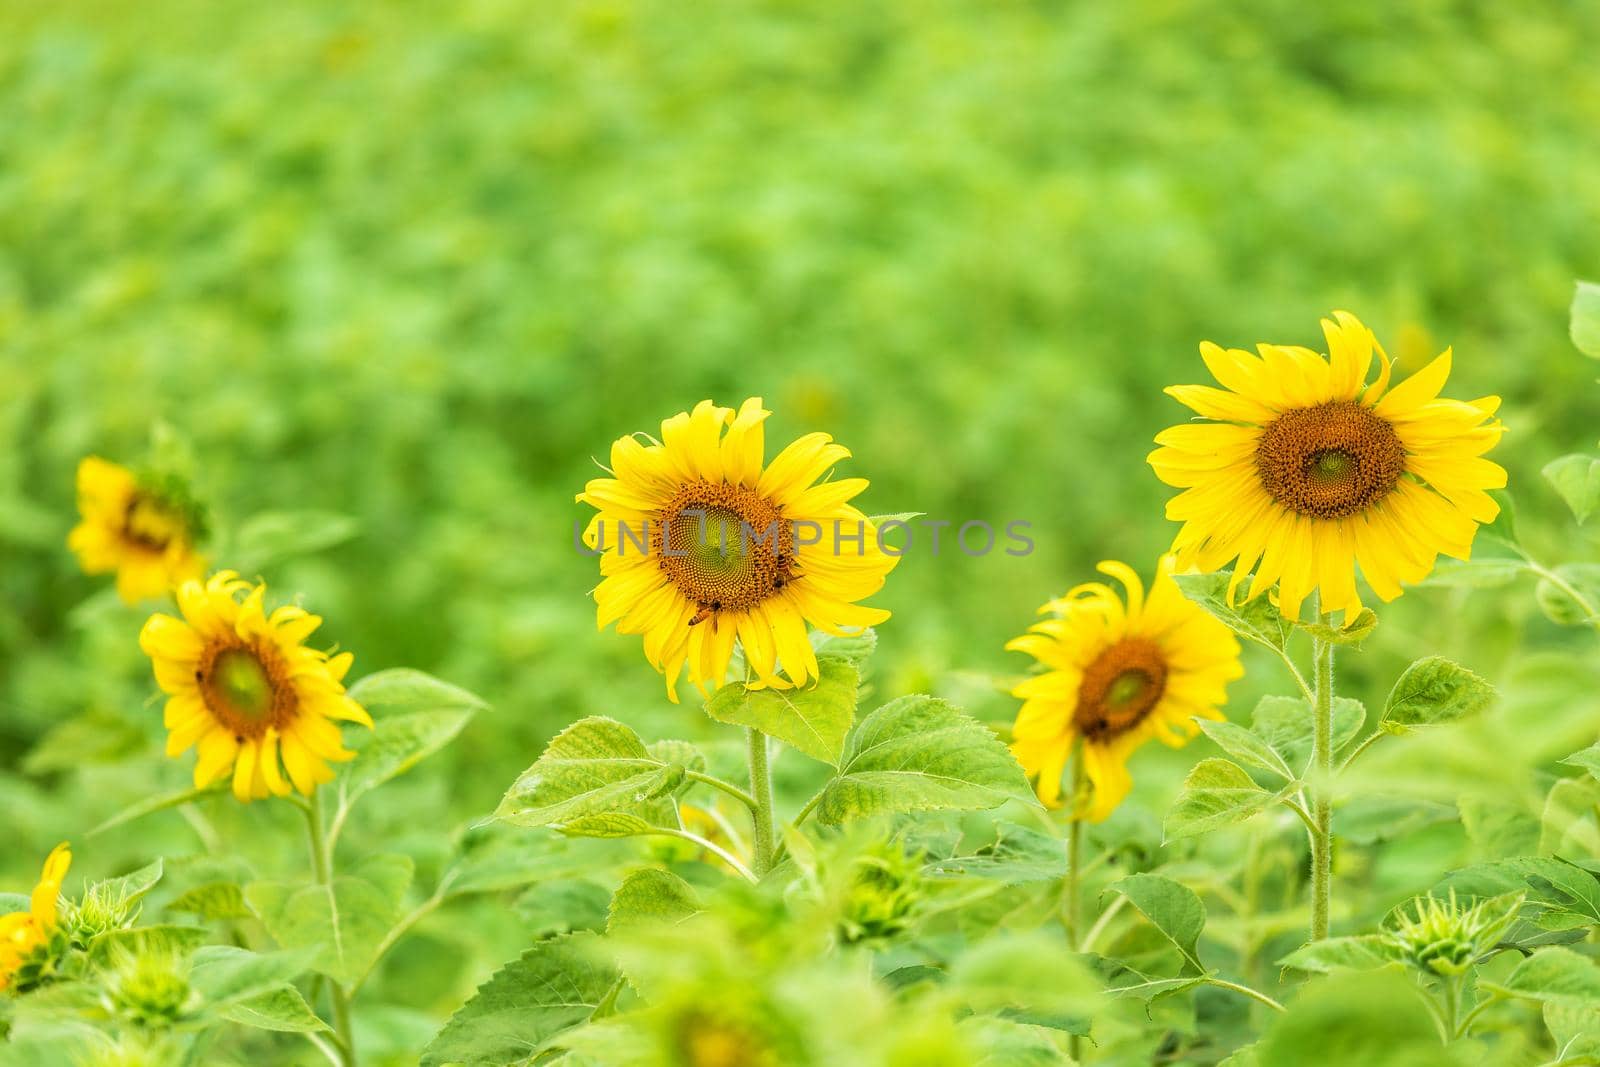 close-up view of sunflower fields green grass background. by tinapob2534